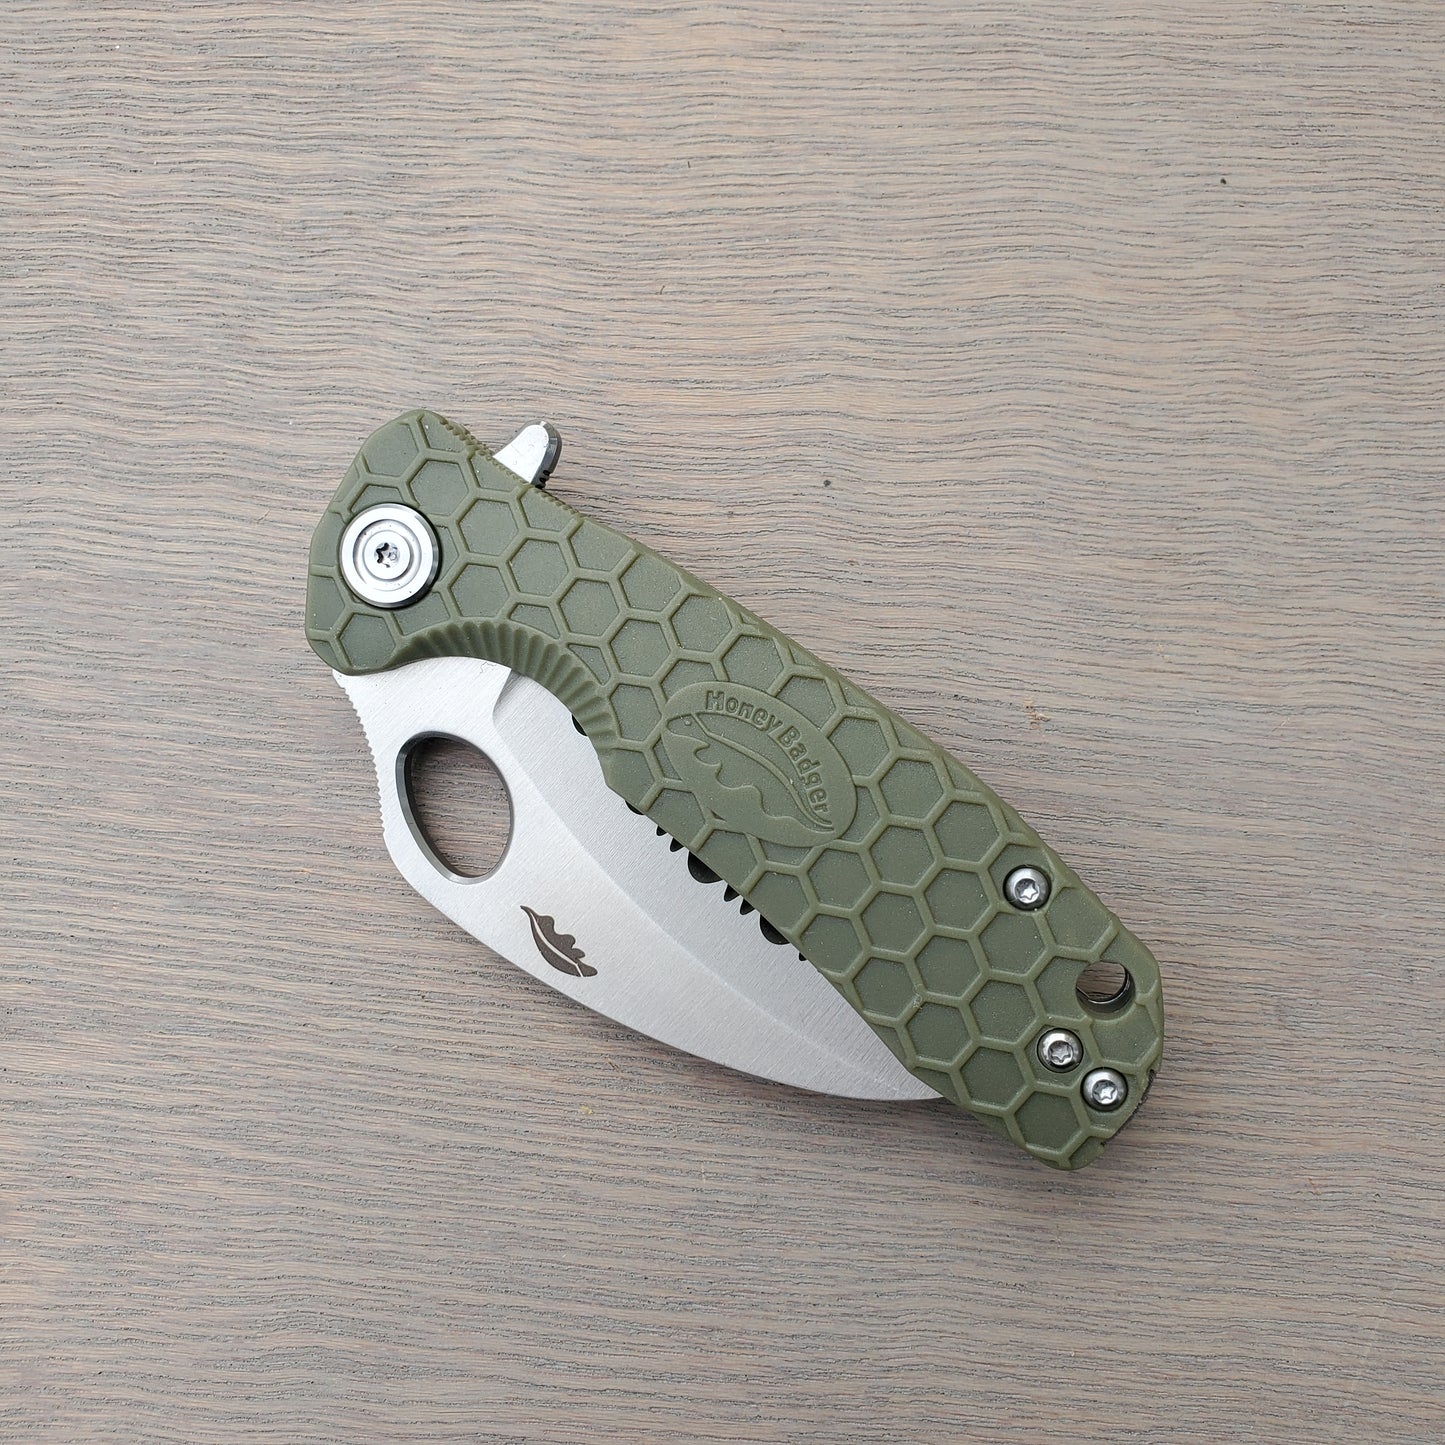 Honey Badger Small Claw - Serrated - Green